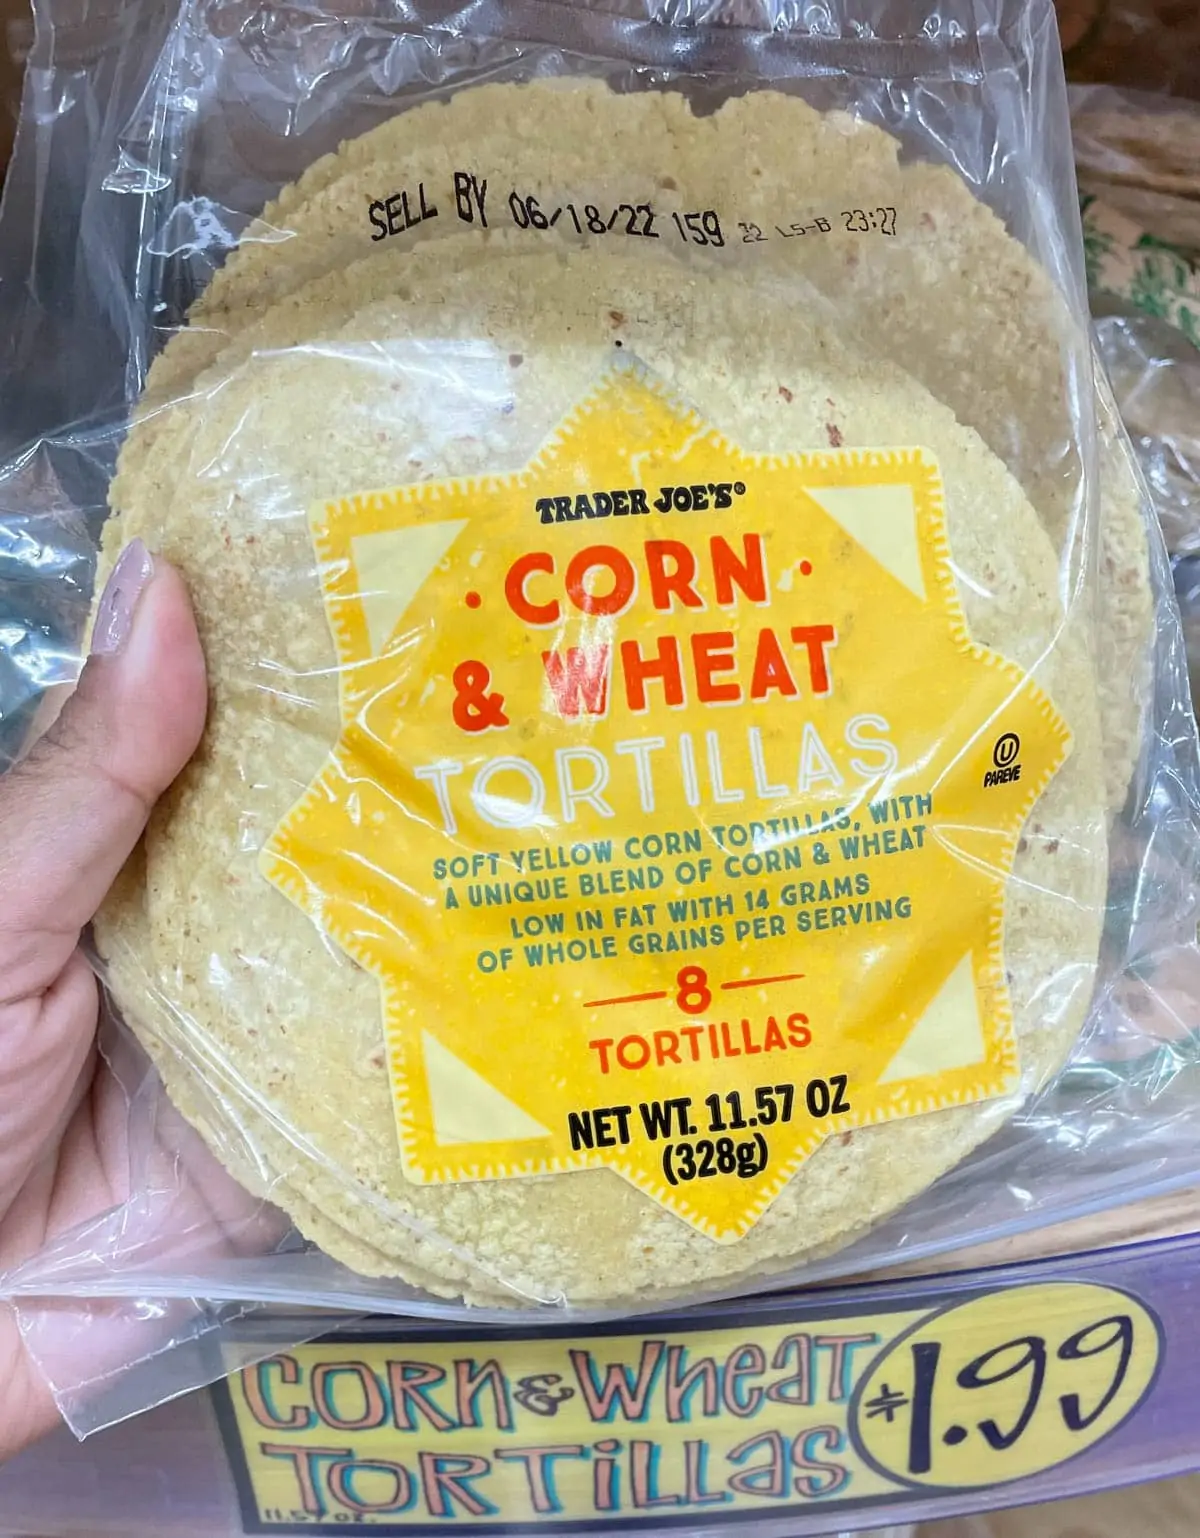 Corn and wheat tortilla from trader joes 